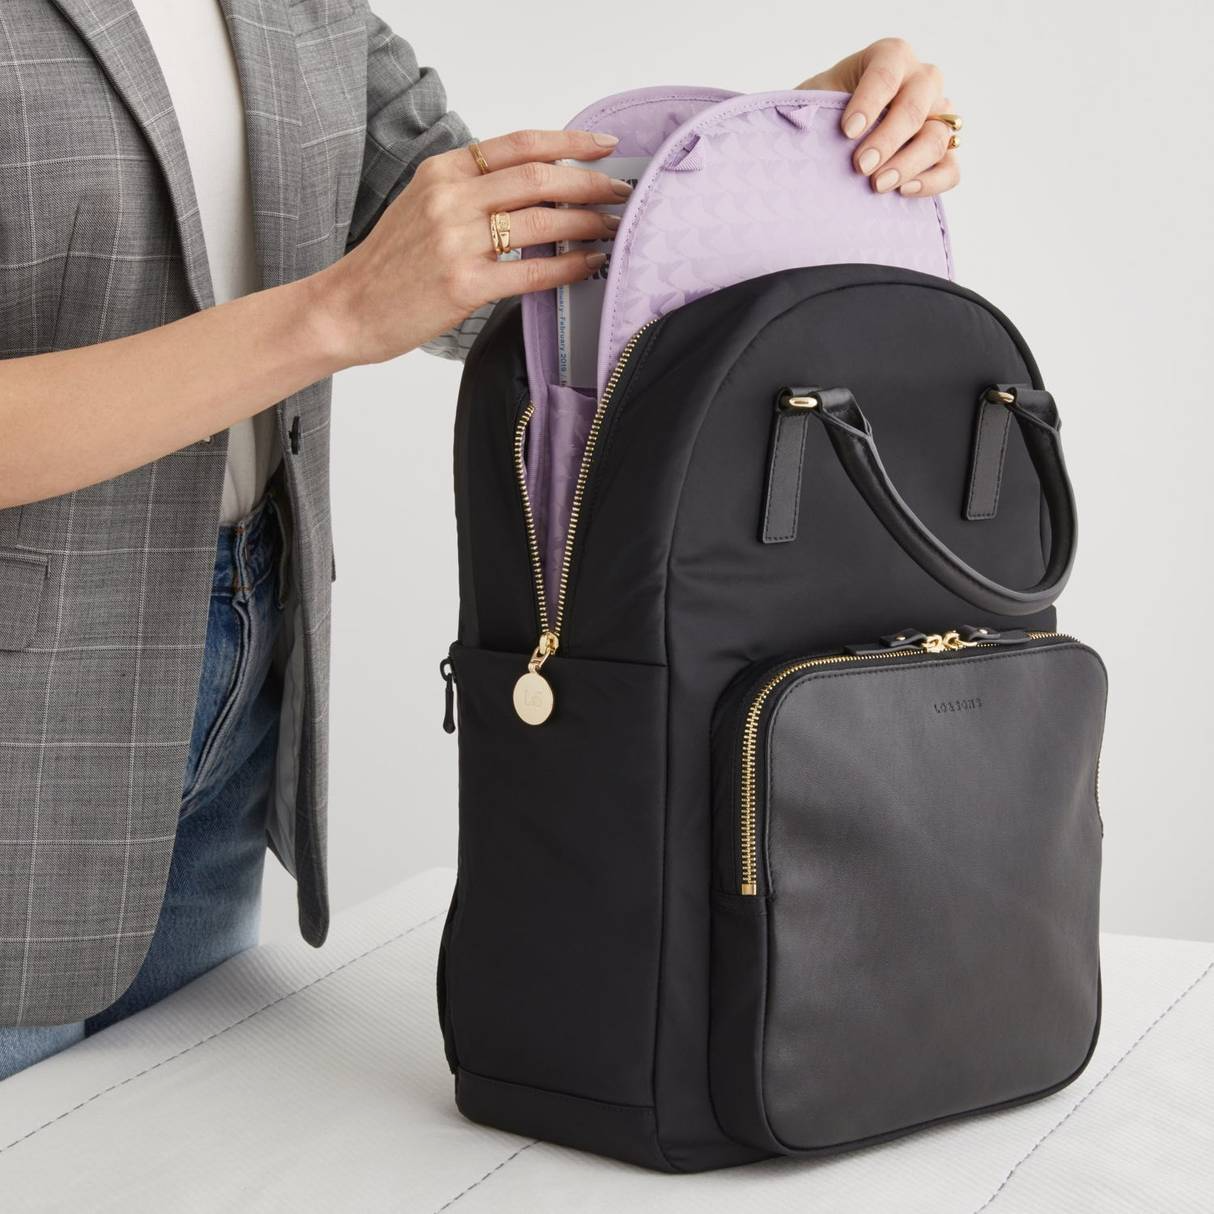 Lo & Sons Pearl Saffiano Review - The Perfect Travel Bag? - since wen